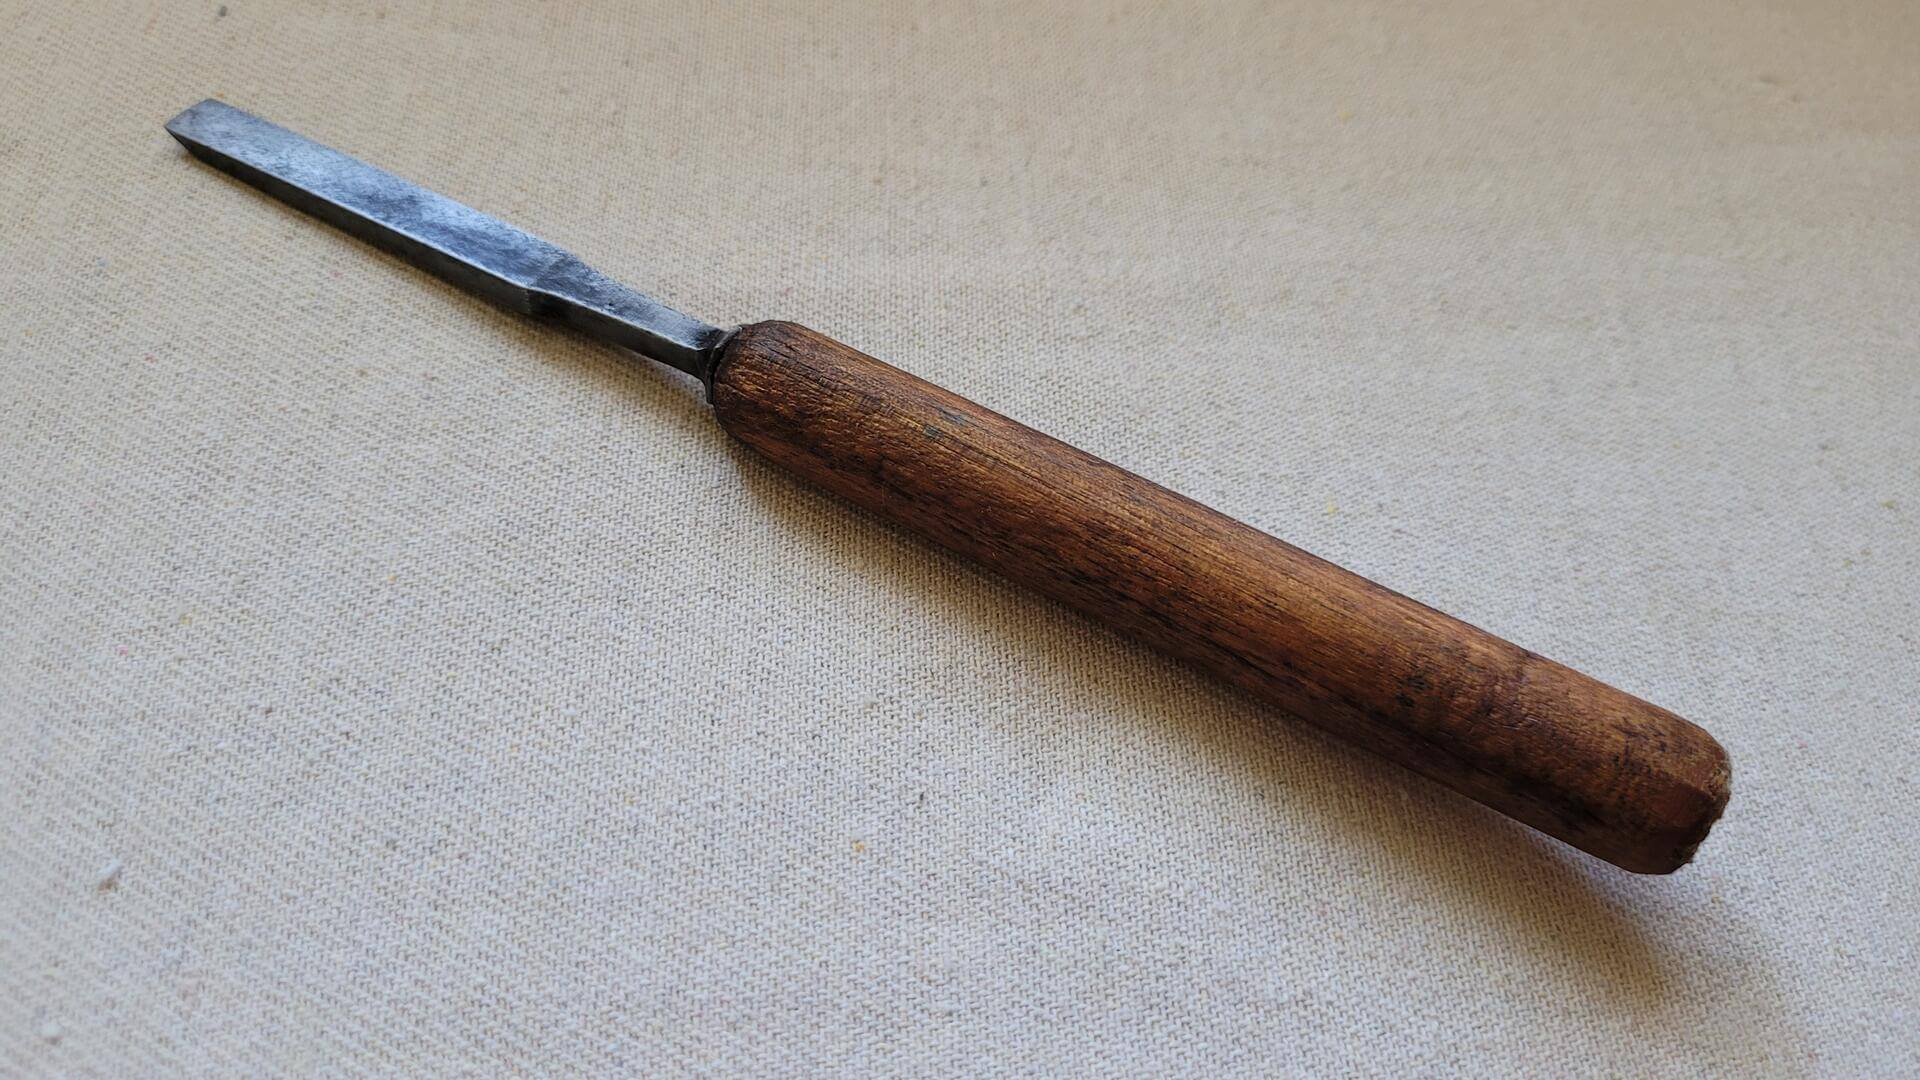 Vintage 1/4" wood carving firmer chisel by James Howarth considered one of the best 19th century edge tool makers. Antique made in Sheffield England collectible woodworking and carpentry tools